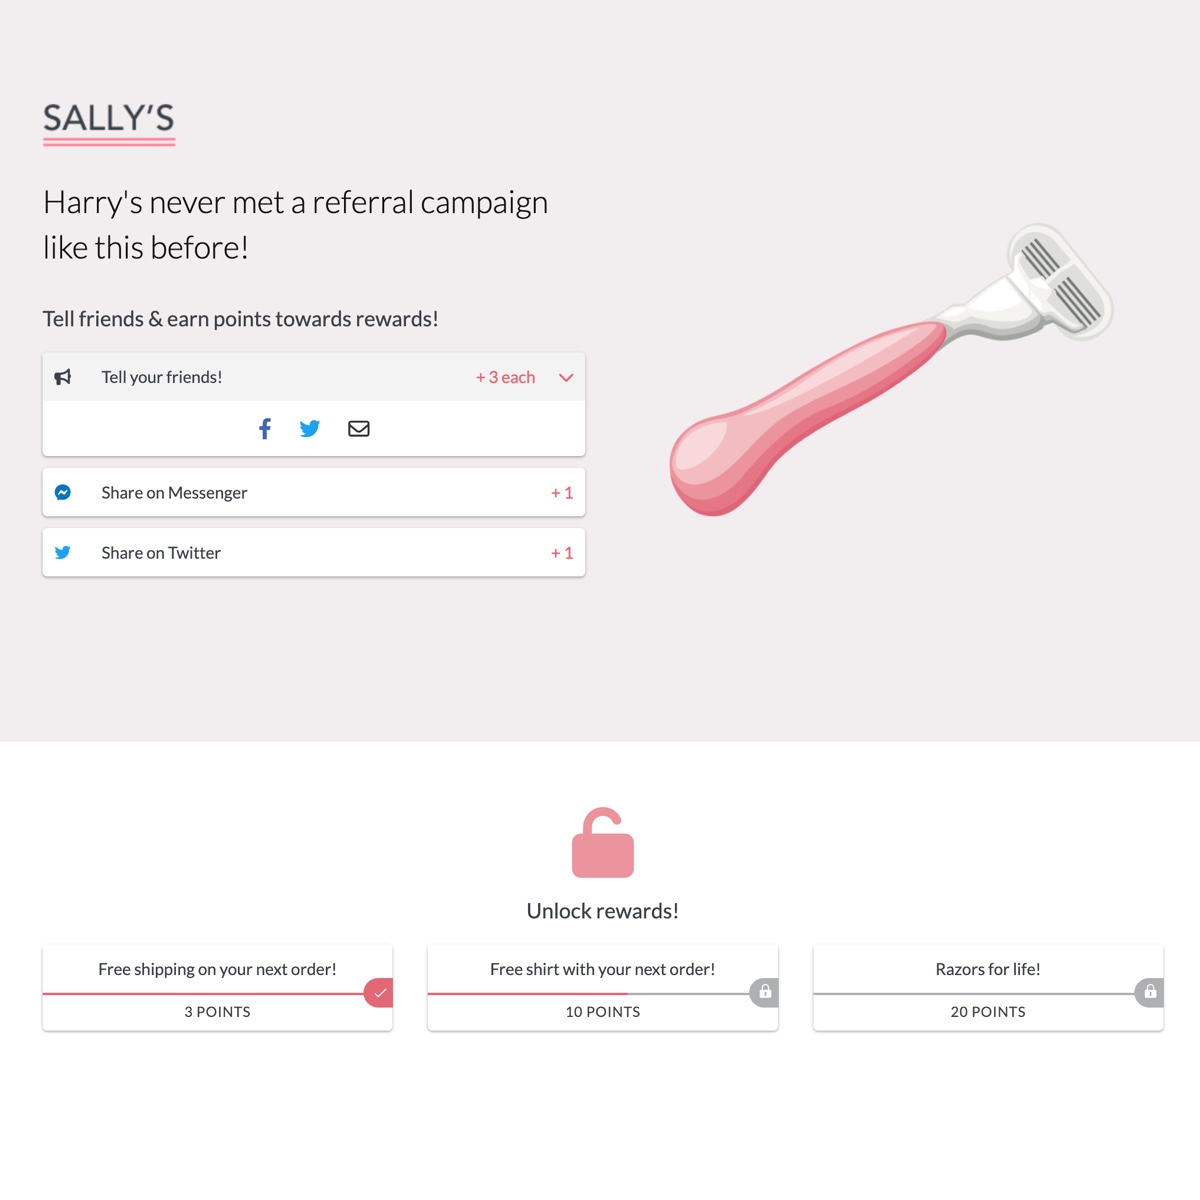 Sally's subscription waitlist campaign with milestone rewards